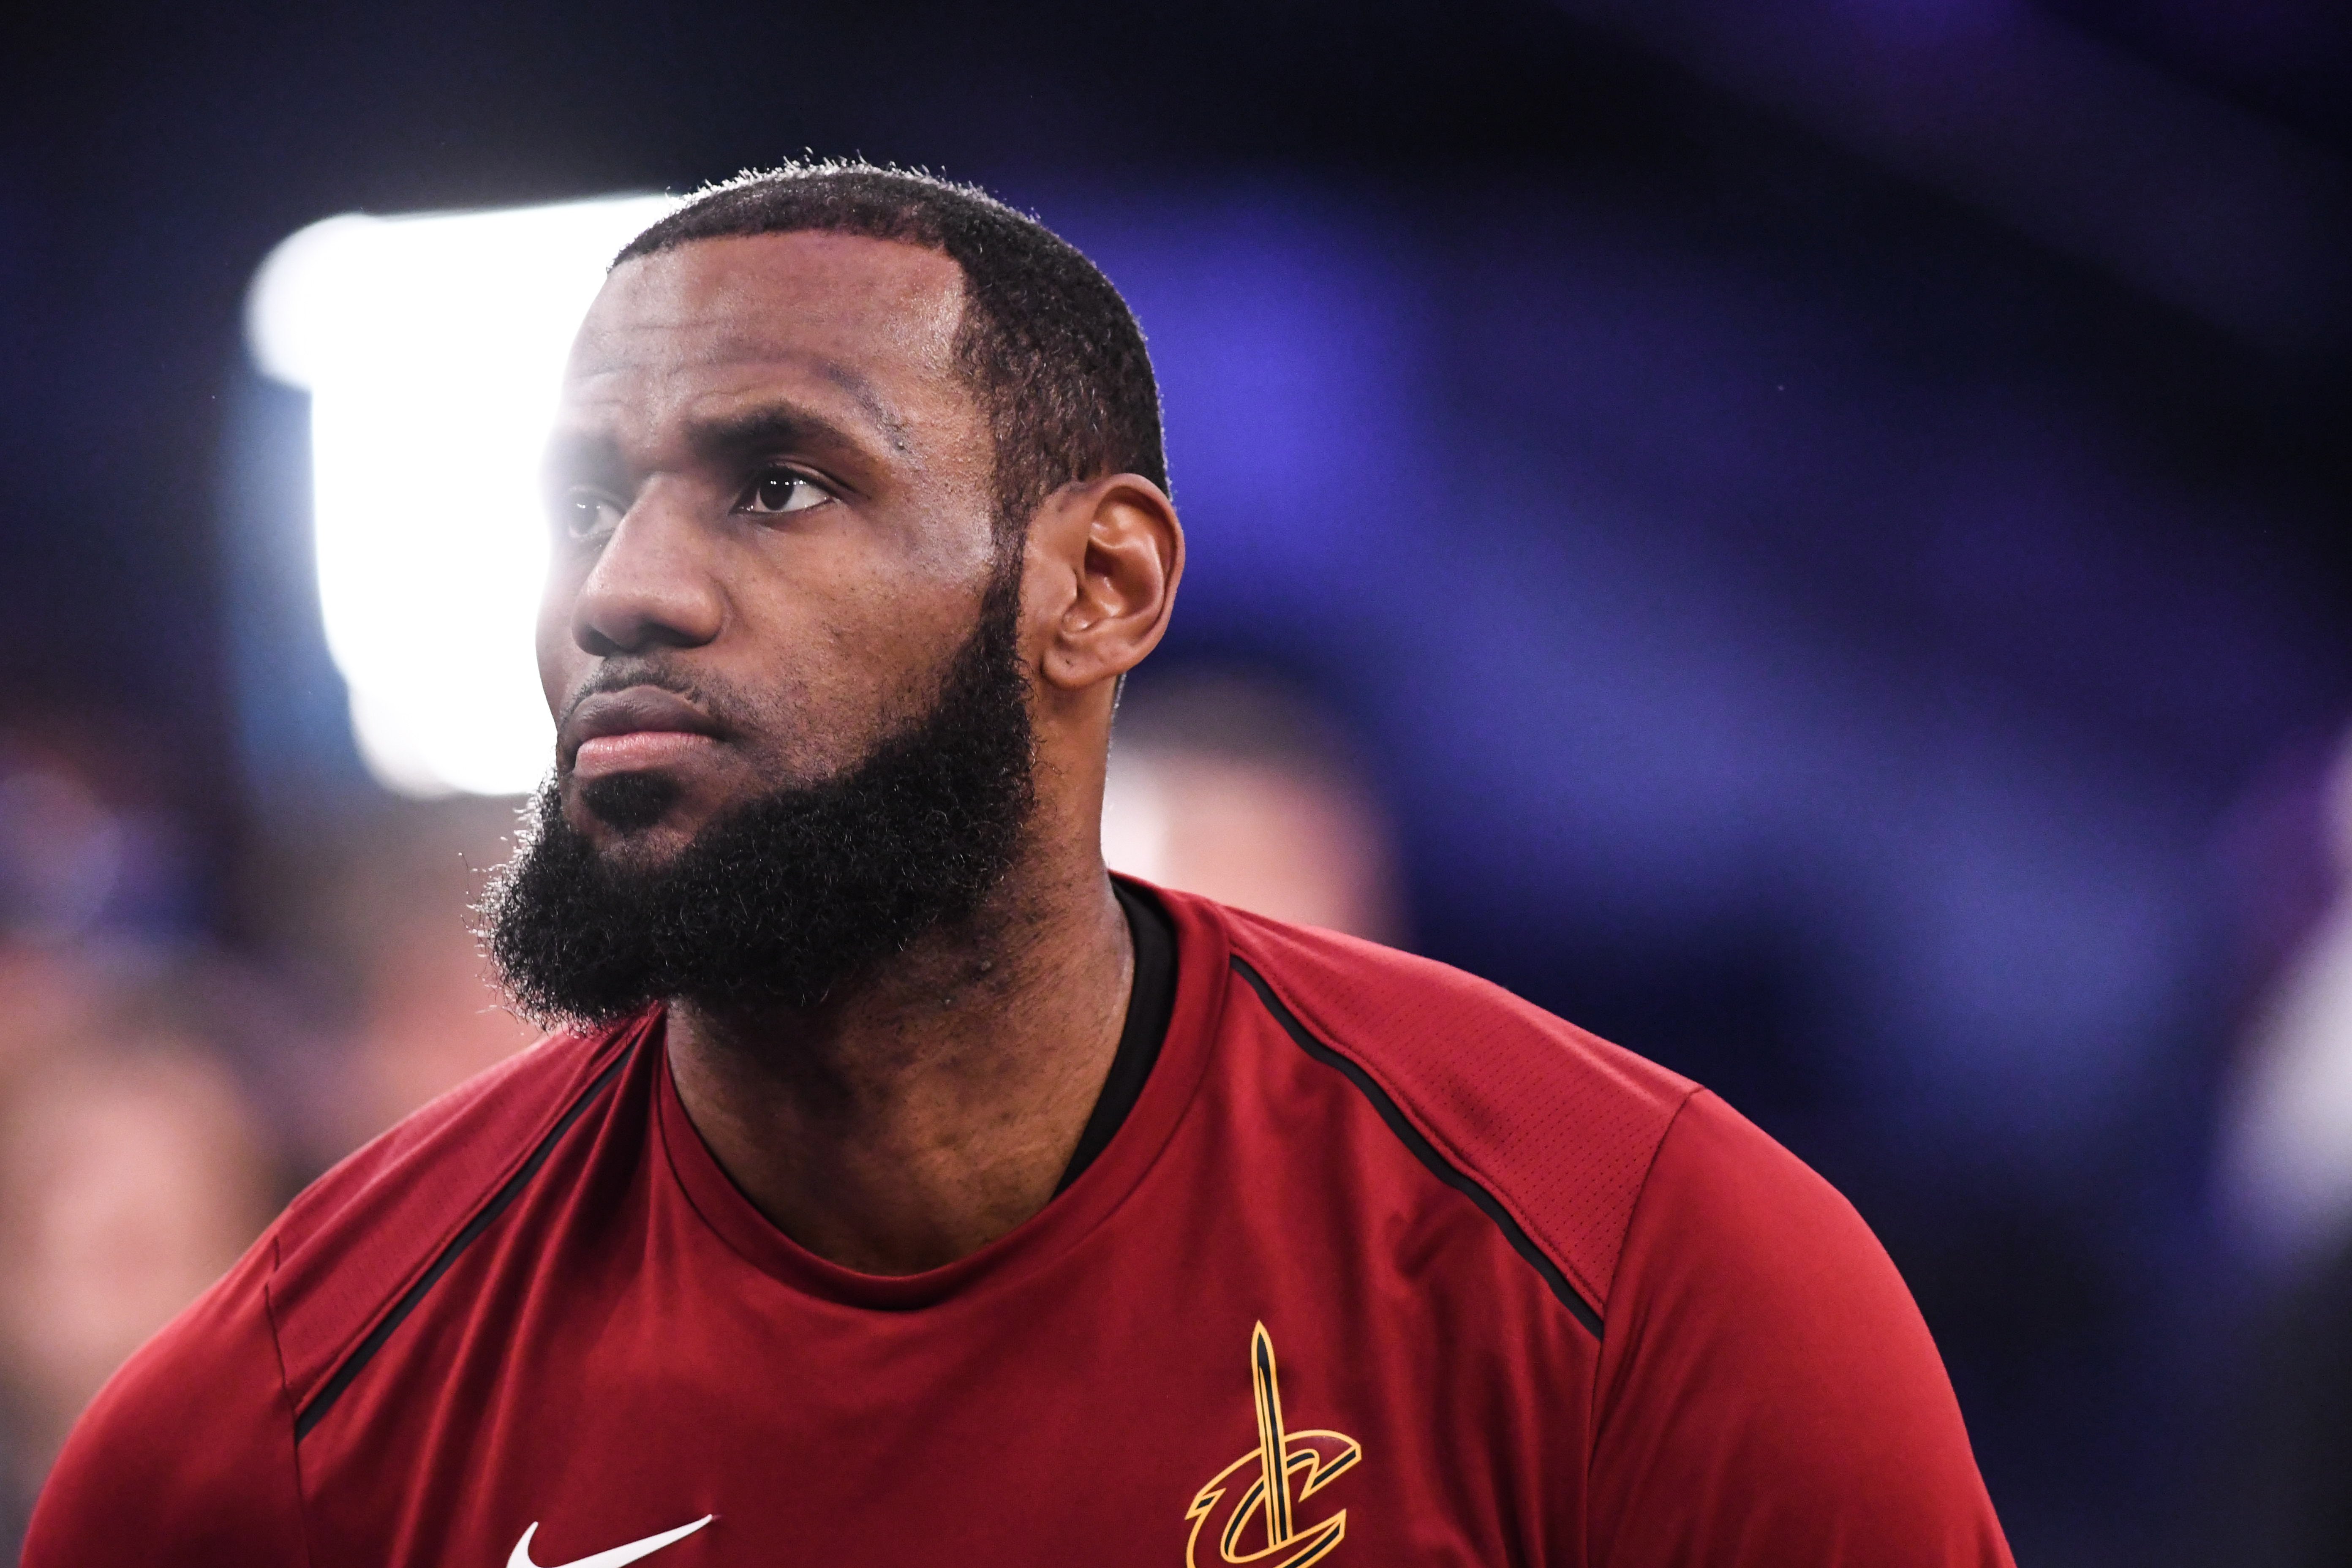 LeBron James pictured before a Cleveland Cavaliers game against the New York Knicks on April 9, 2018 in New York City. | Source: Getty Images